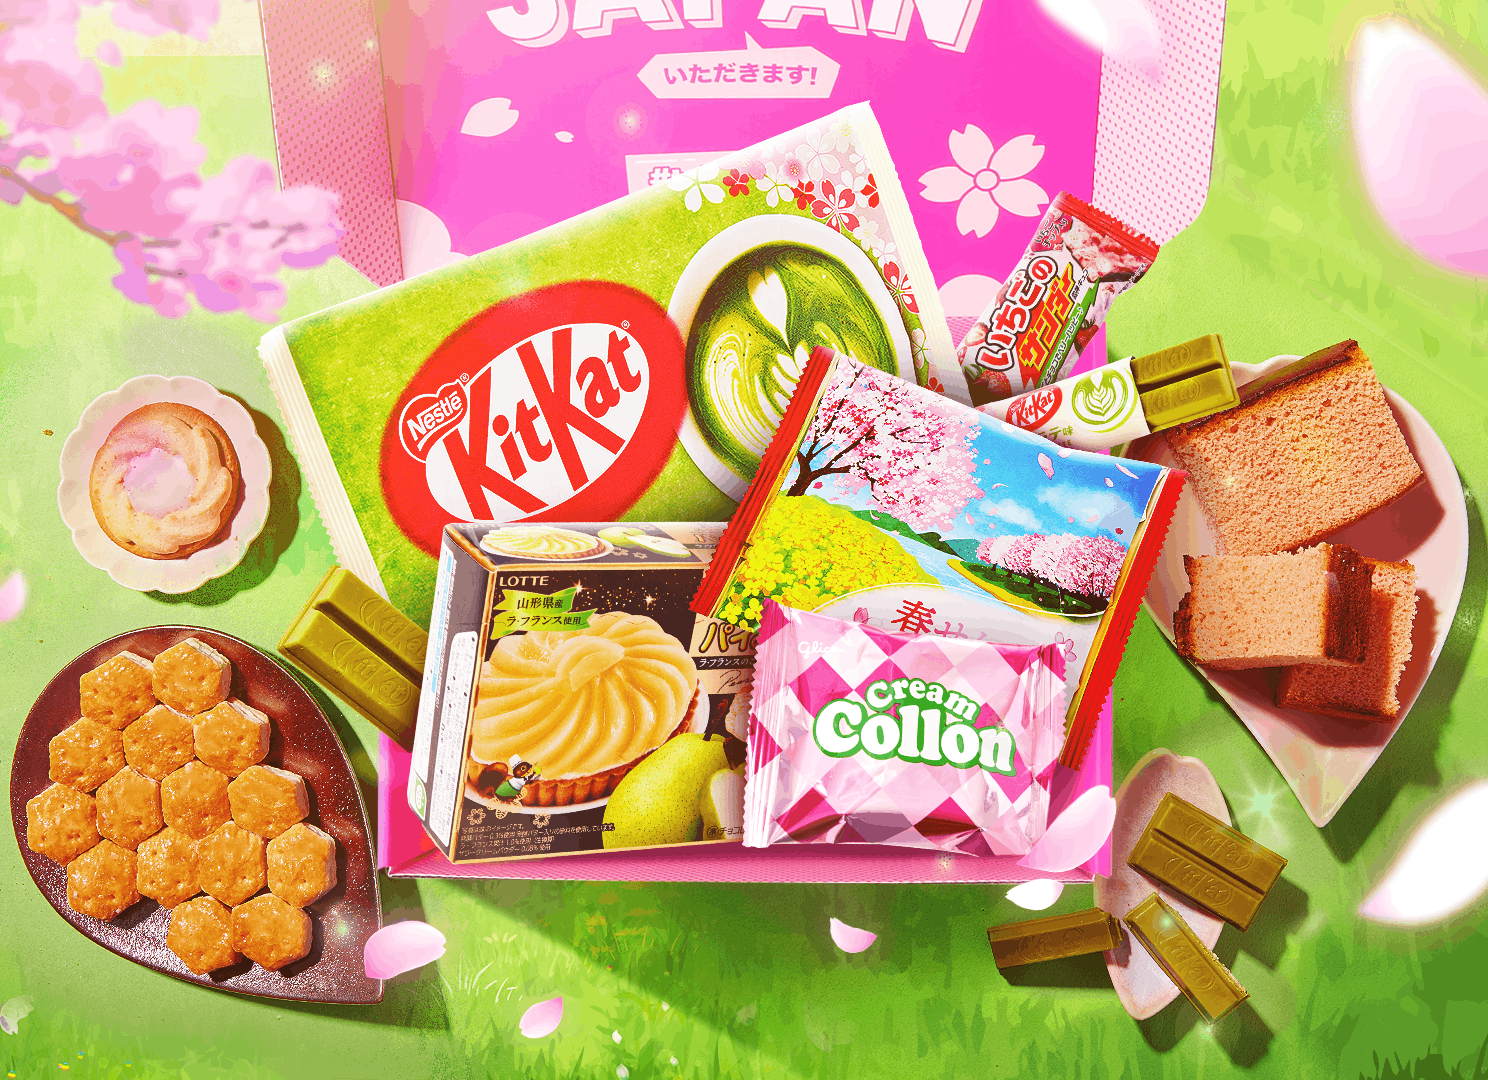 The TokyoTreat special-edition pink sakura box sits open at a cherry blossom picnic, surrounded by main box items and sakura cherry blossom motifs.